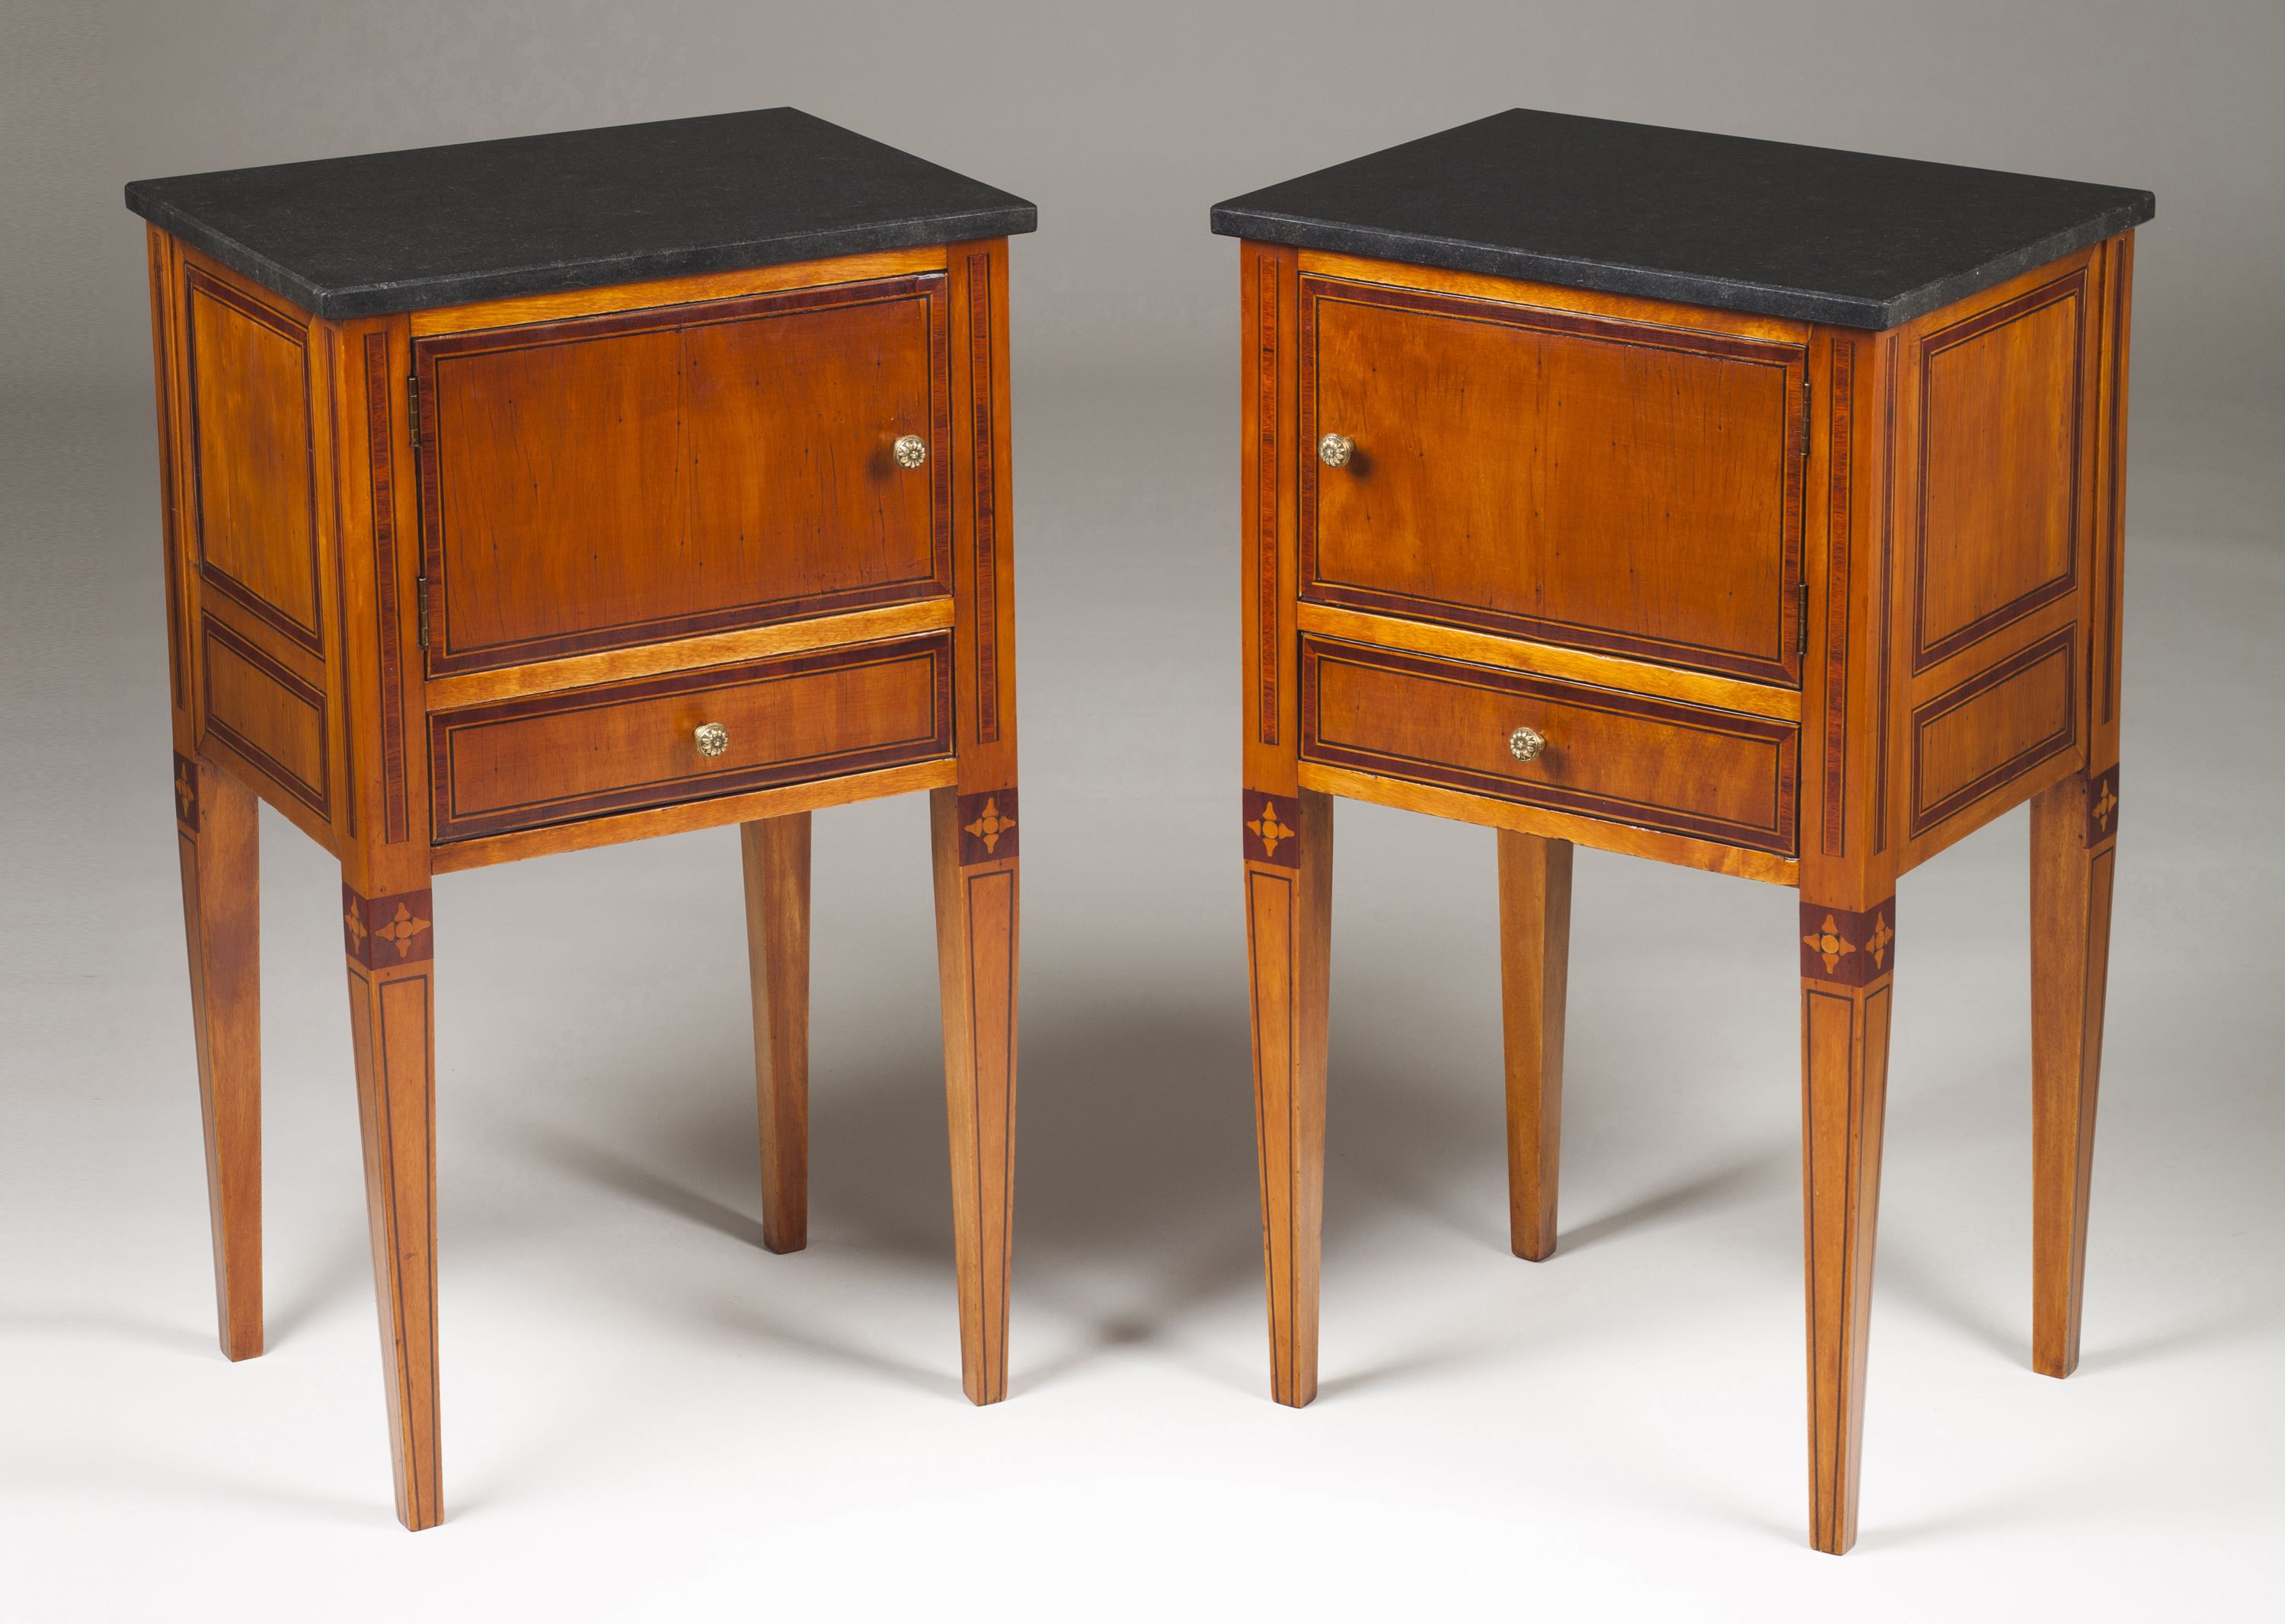 A pair of D. Maria style side tables